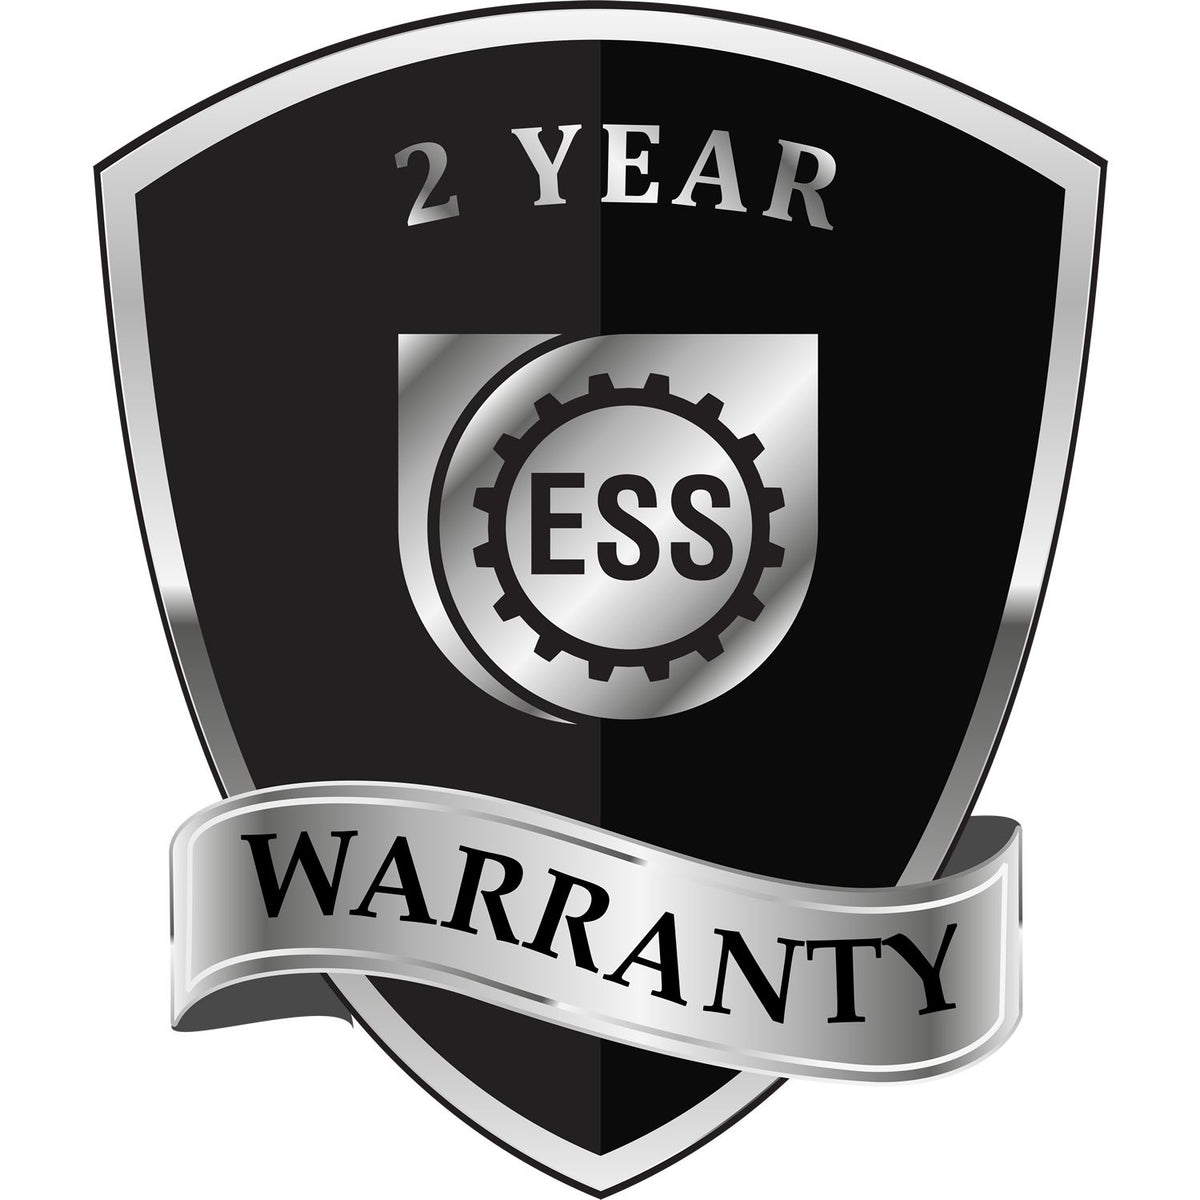 A black and silver badge or emblem showing warranty information for the Hybrid New Mexico Landscape Architect Seal